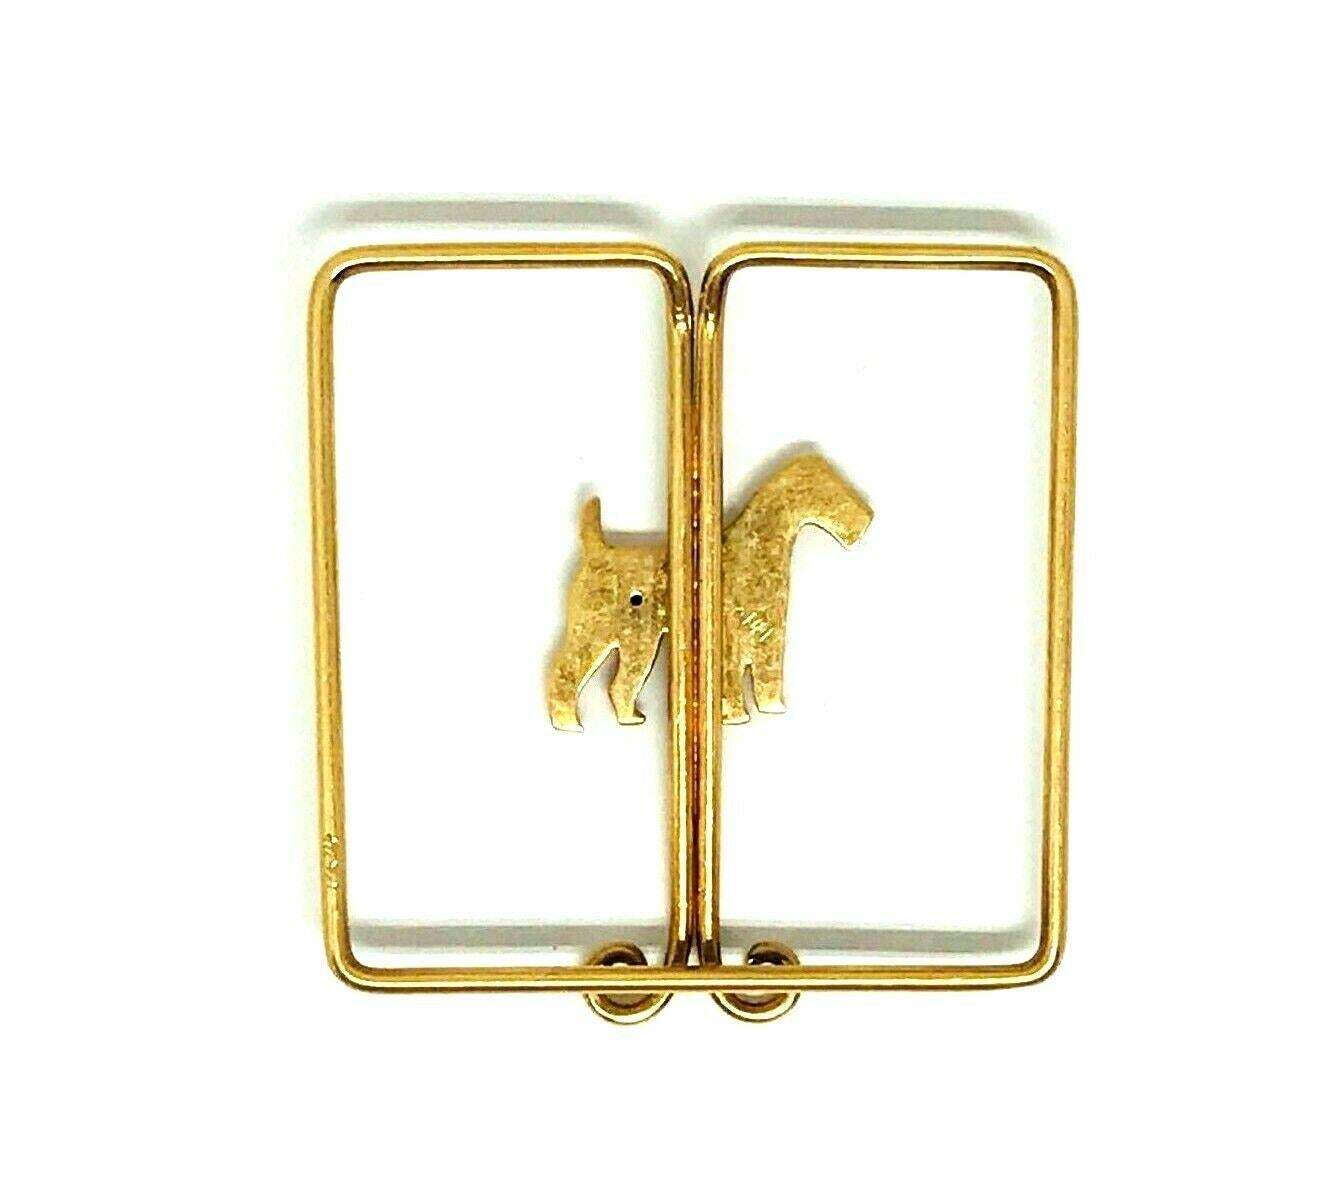 14k yellow gold money clip featuring a dog figure with a tiny ruby eye, wearing an enamel collar. A fine and stylish vintage accessory from 1970s. Stamped with a hallmark for 14k gold.
Measurements: the clip is 1 1/2